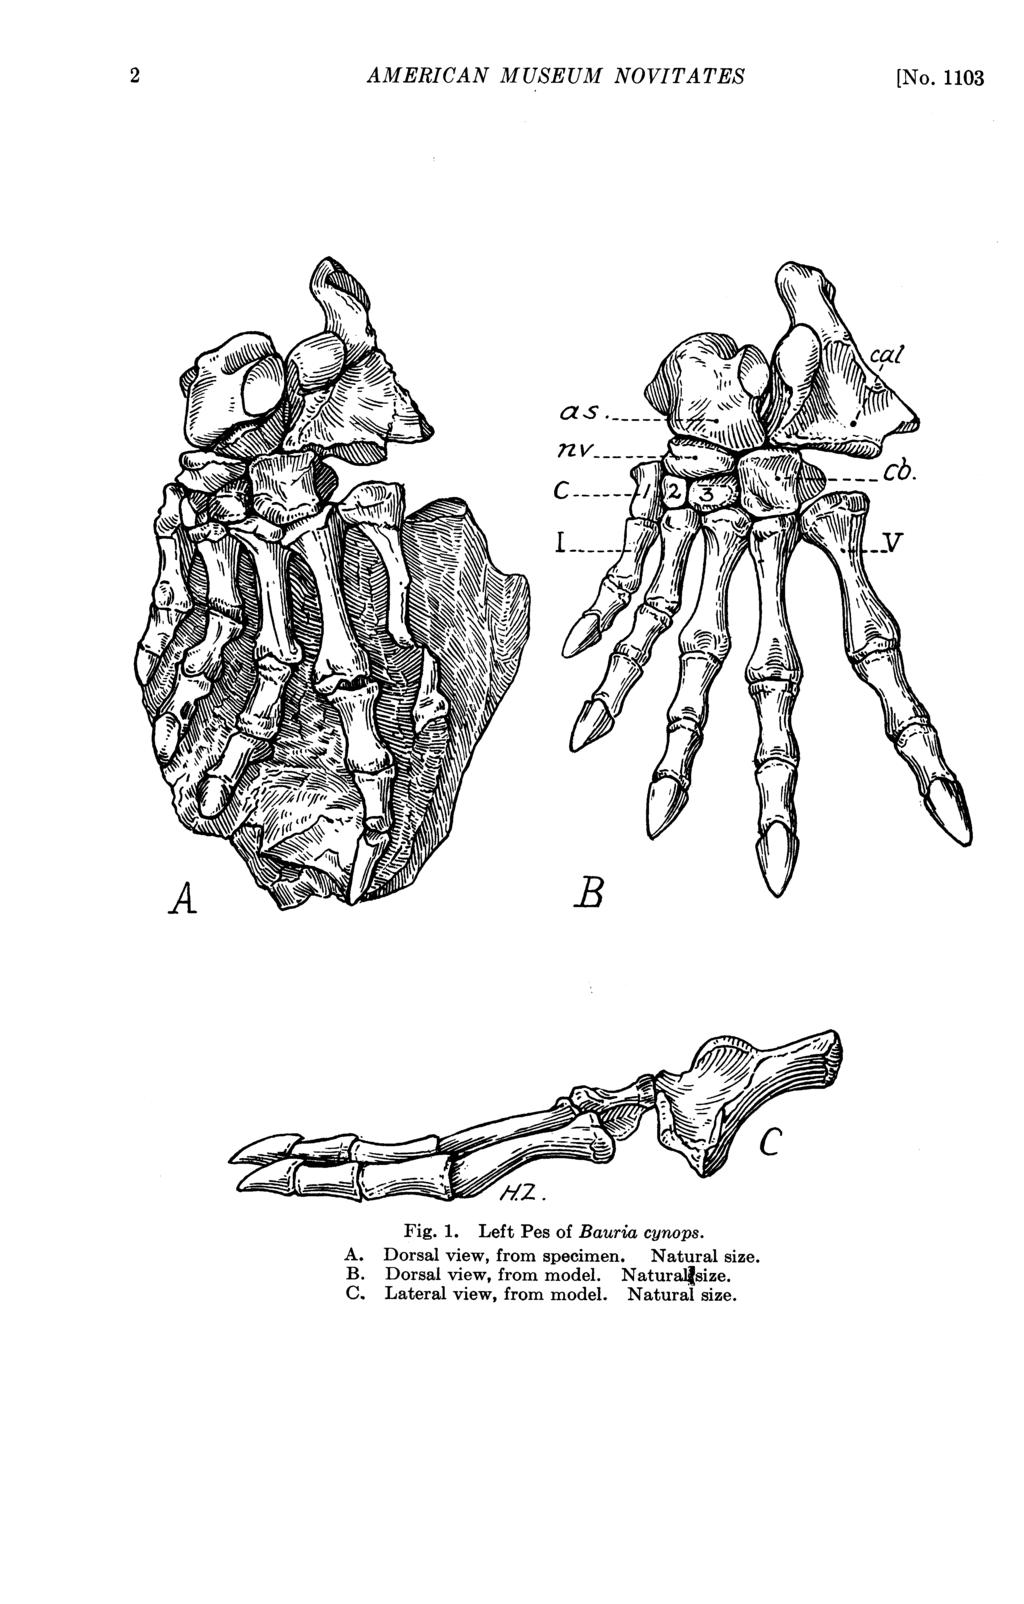 2 AMERICAN MUSEUM NOVITATES [No. 1103 C9 7. Fig. 1. Left Pes of Bauria cynops. A. Dorsal view, from specimen.